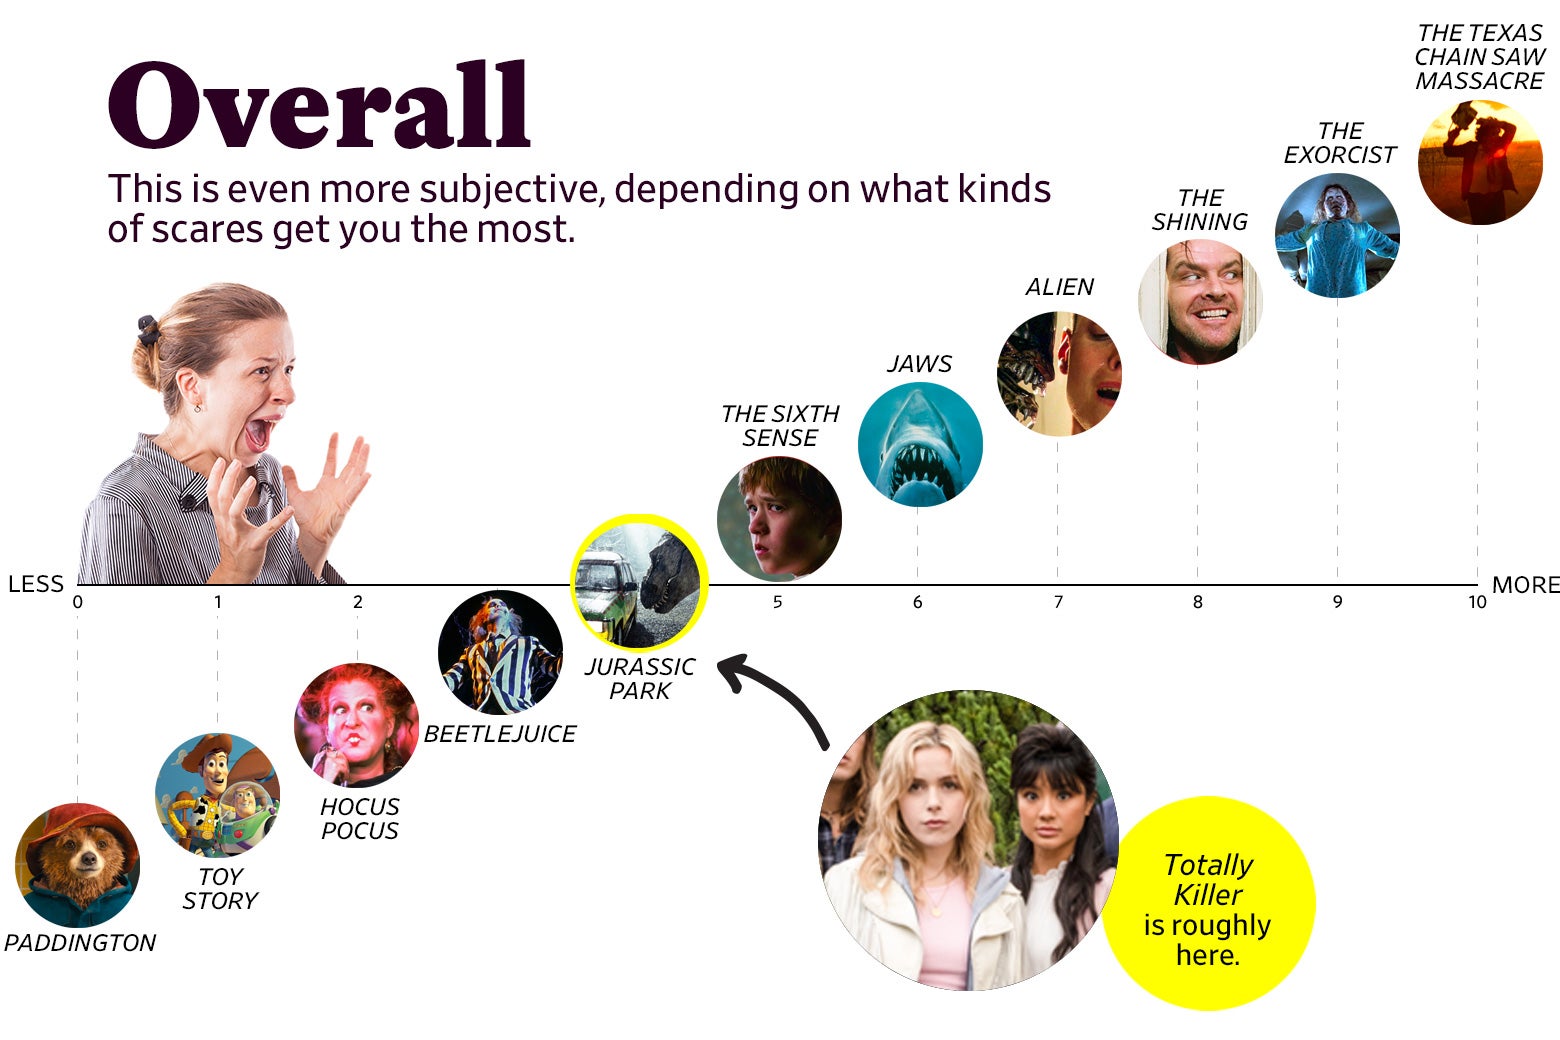 A chart titled “Overall: This is even more subjective, depending on what kinds of scares get you the most” shows that Totally Killer ranks a 4 overall, roughly the same as Jurassic Park. The scale ranges from Paddington (0) to The Texas Chain Saw Massacre, 1974 (10).